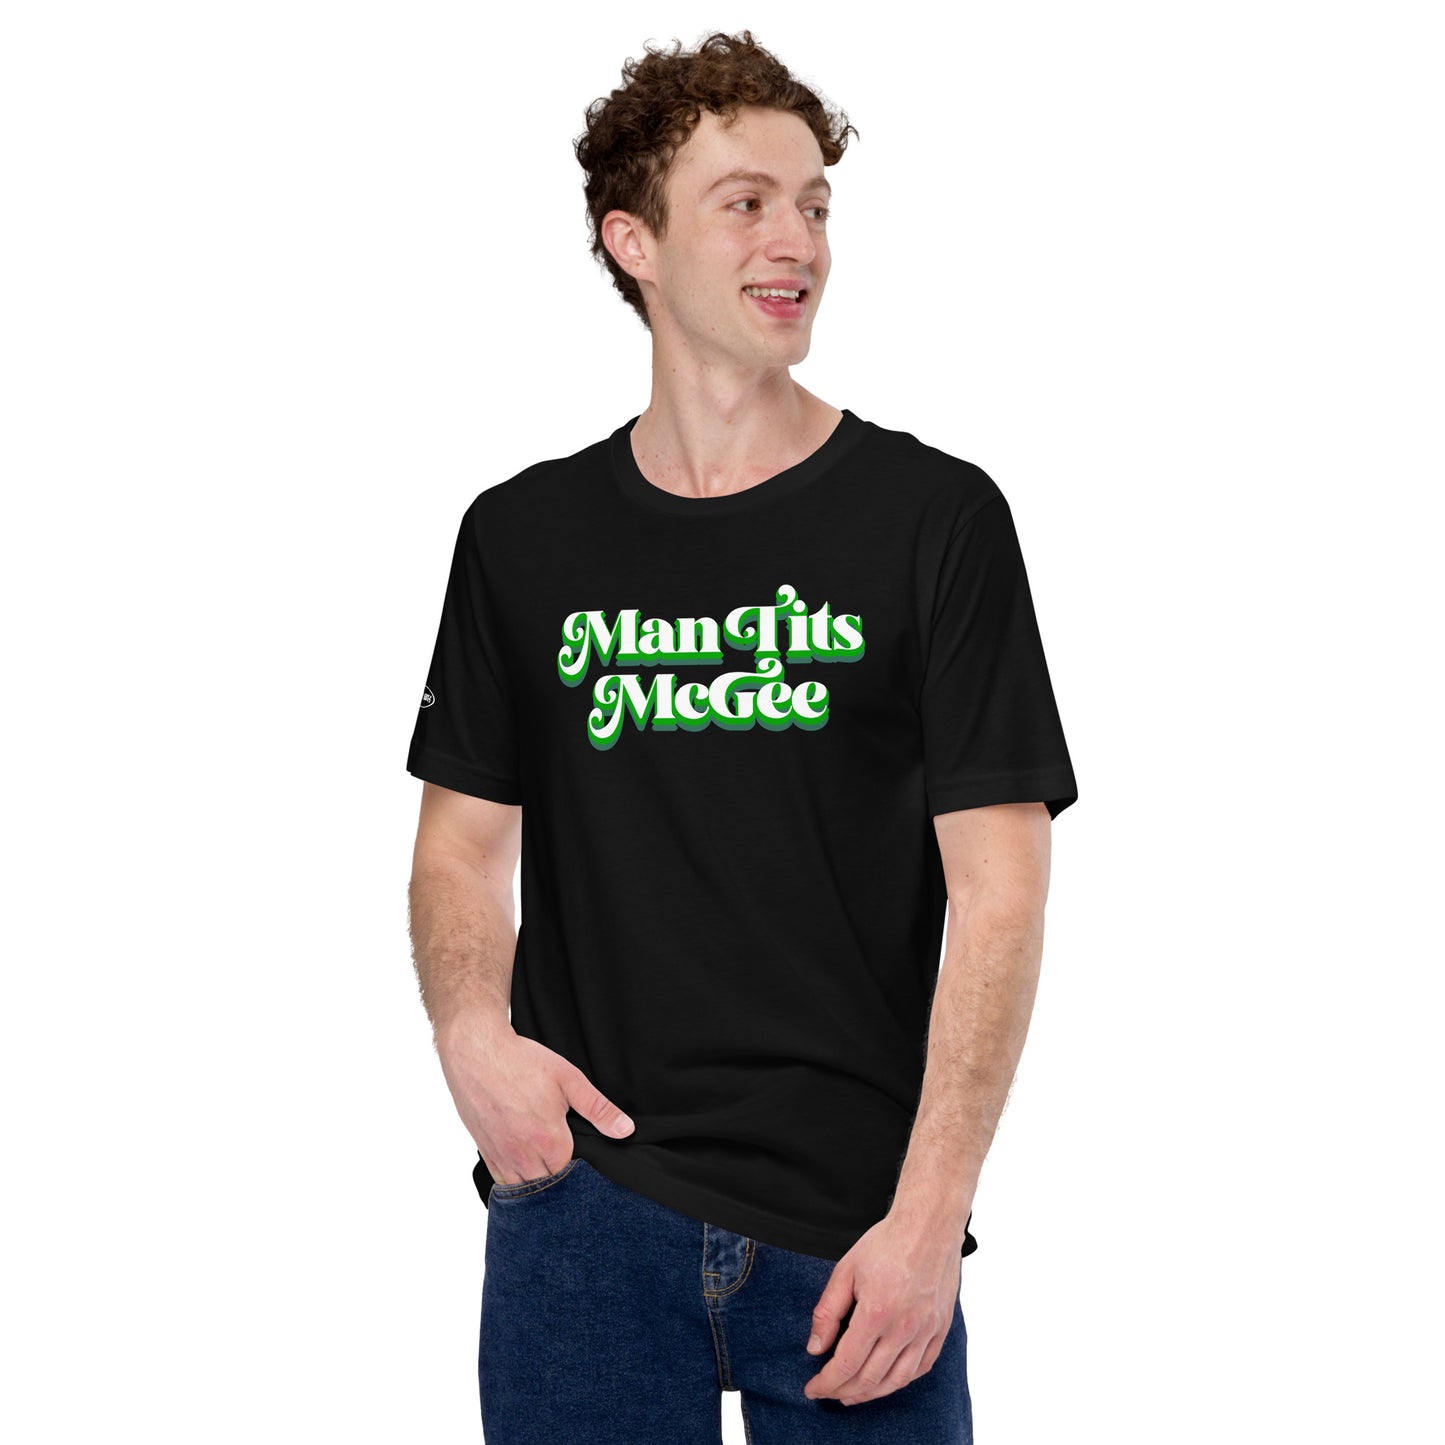 St. Patrick's Day - Man Tits McGee - Funny T-Shirt